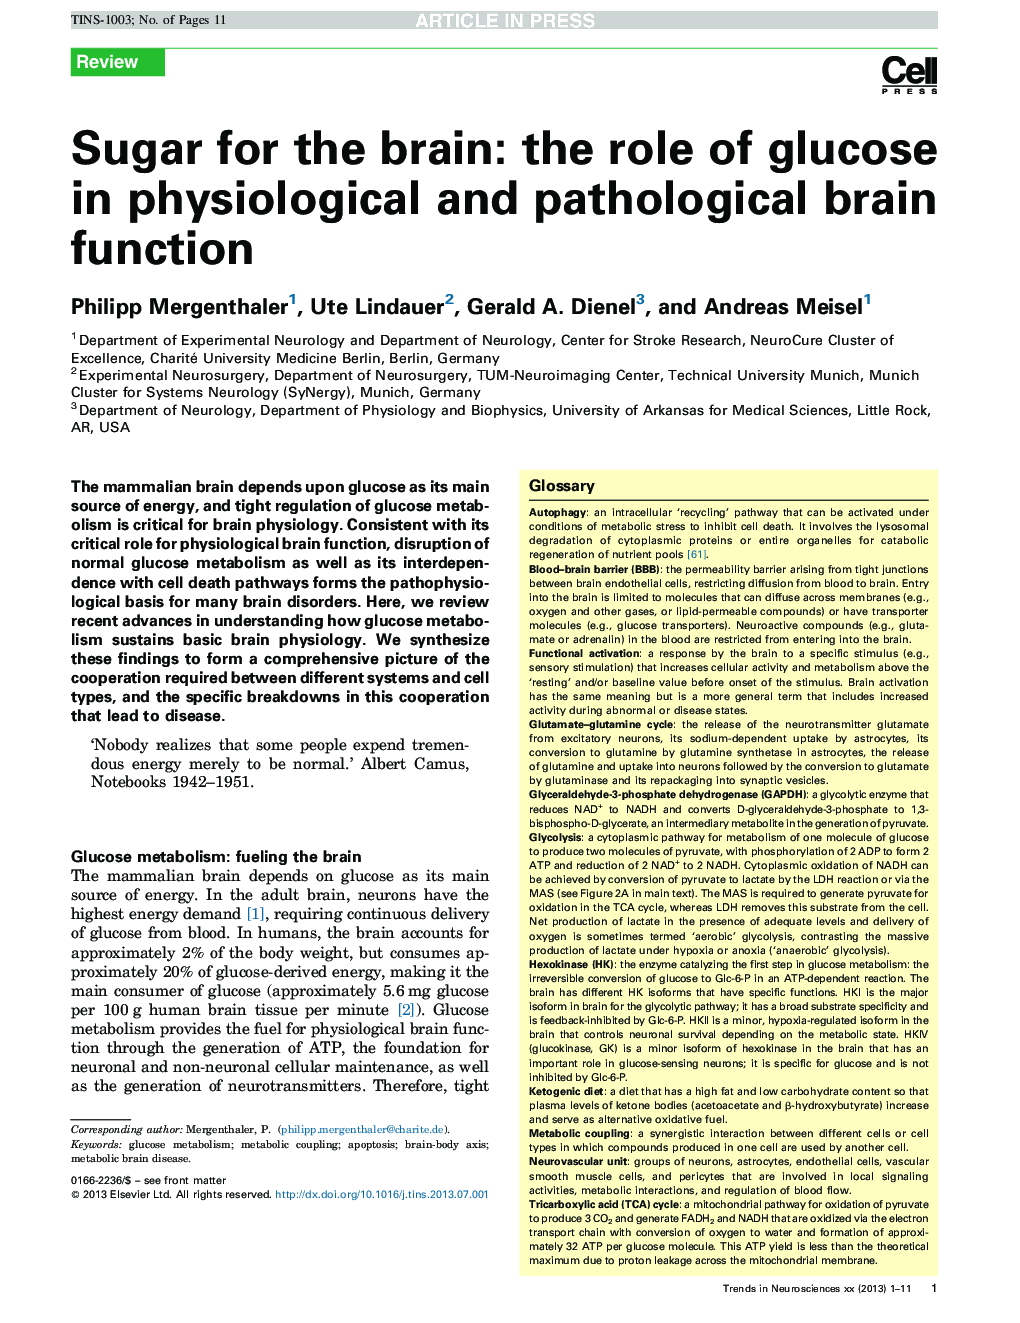 Sugar for the brain: the role of glucose in physiological and pathological brain function